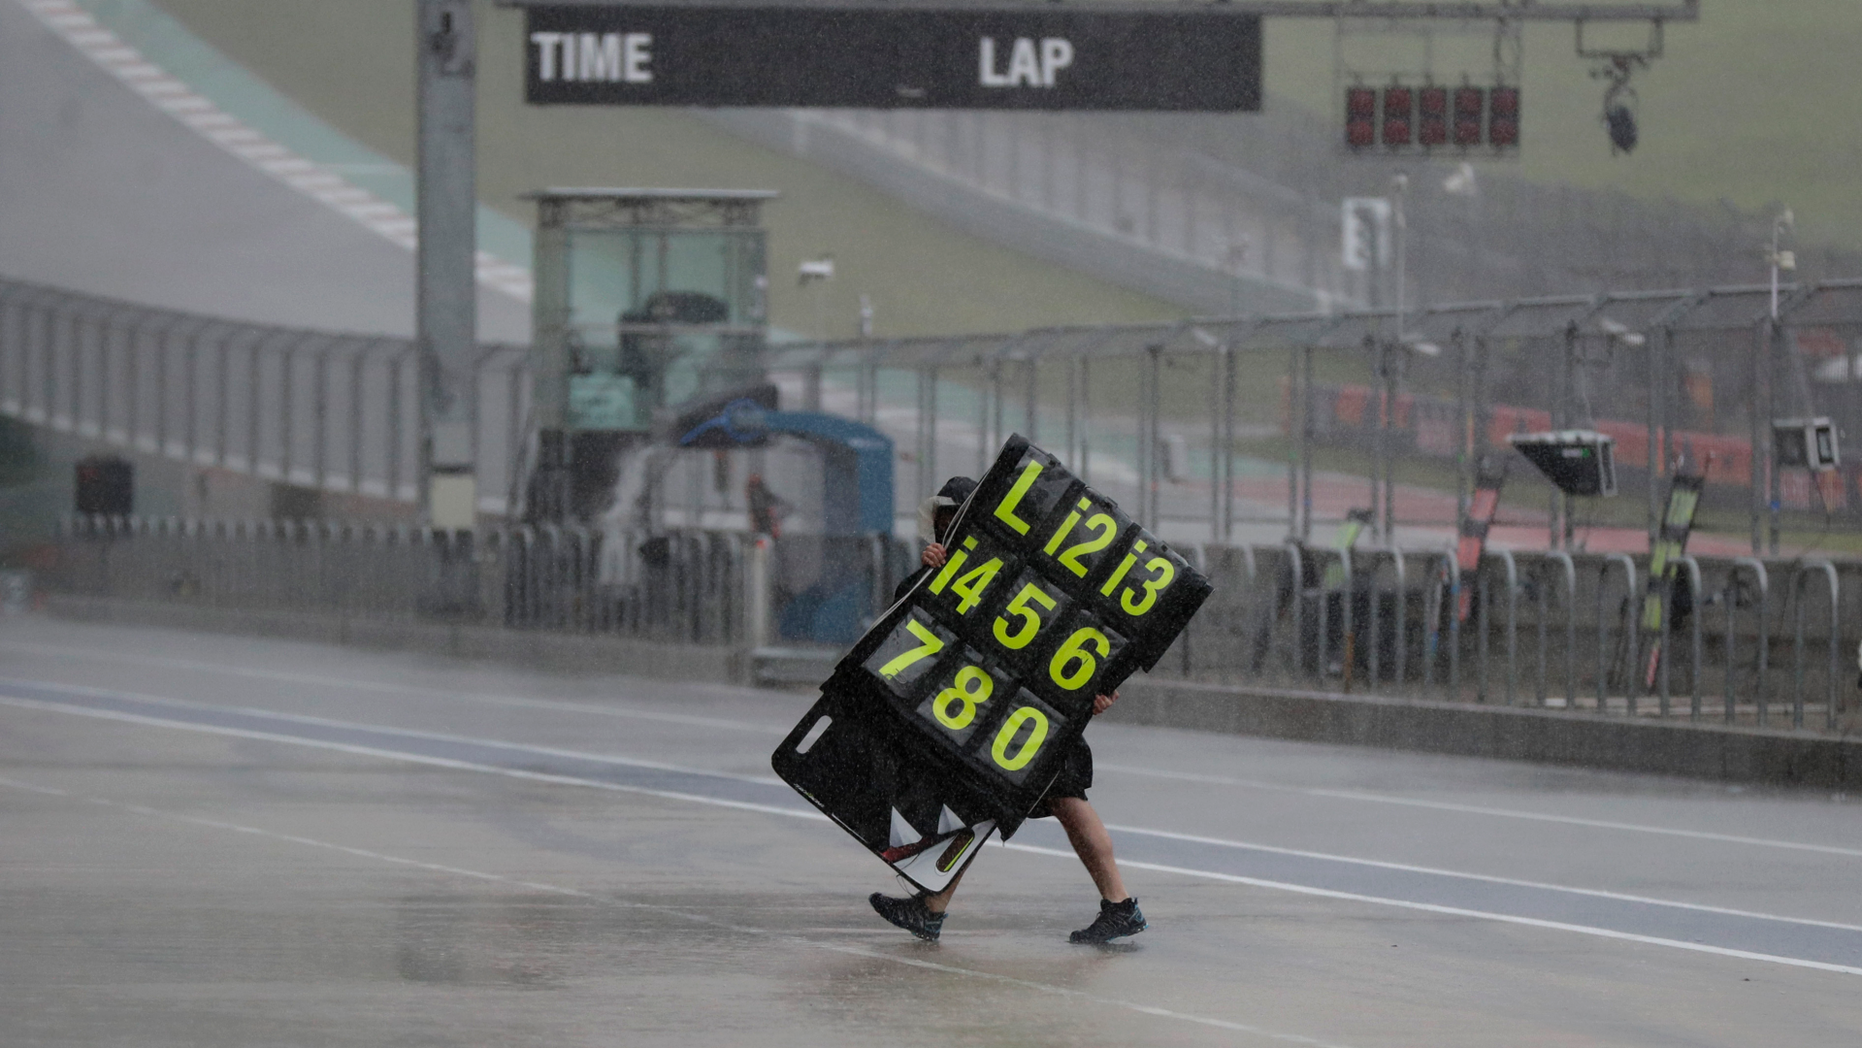 A crew member moves the traffic signs during a time delay for testing and qualifying for the motorcycle race of the Grand Prix of the Americas on the Circuit of the Americas on Saturday, April 13, 2019, in Austin, Texas. (AP Photo / Eric Gay)